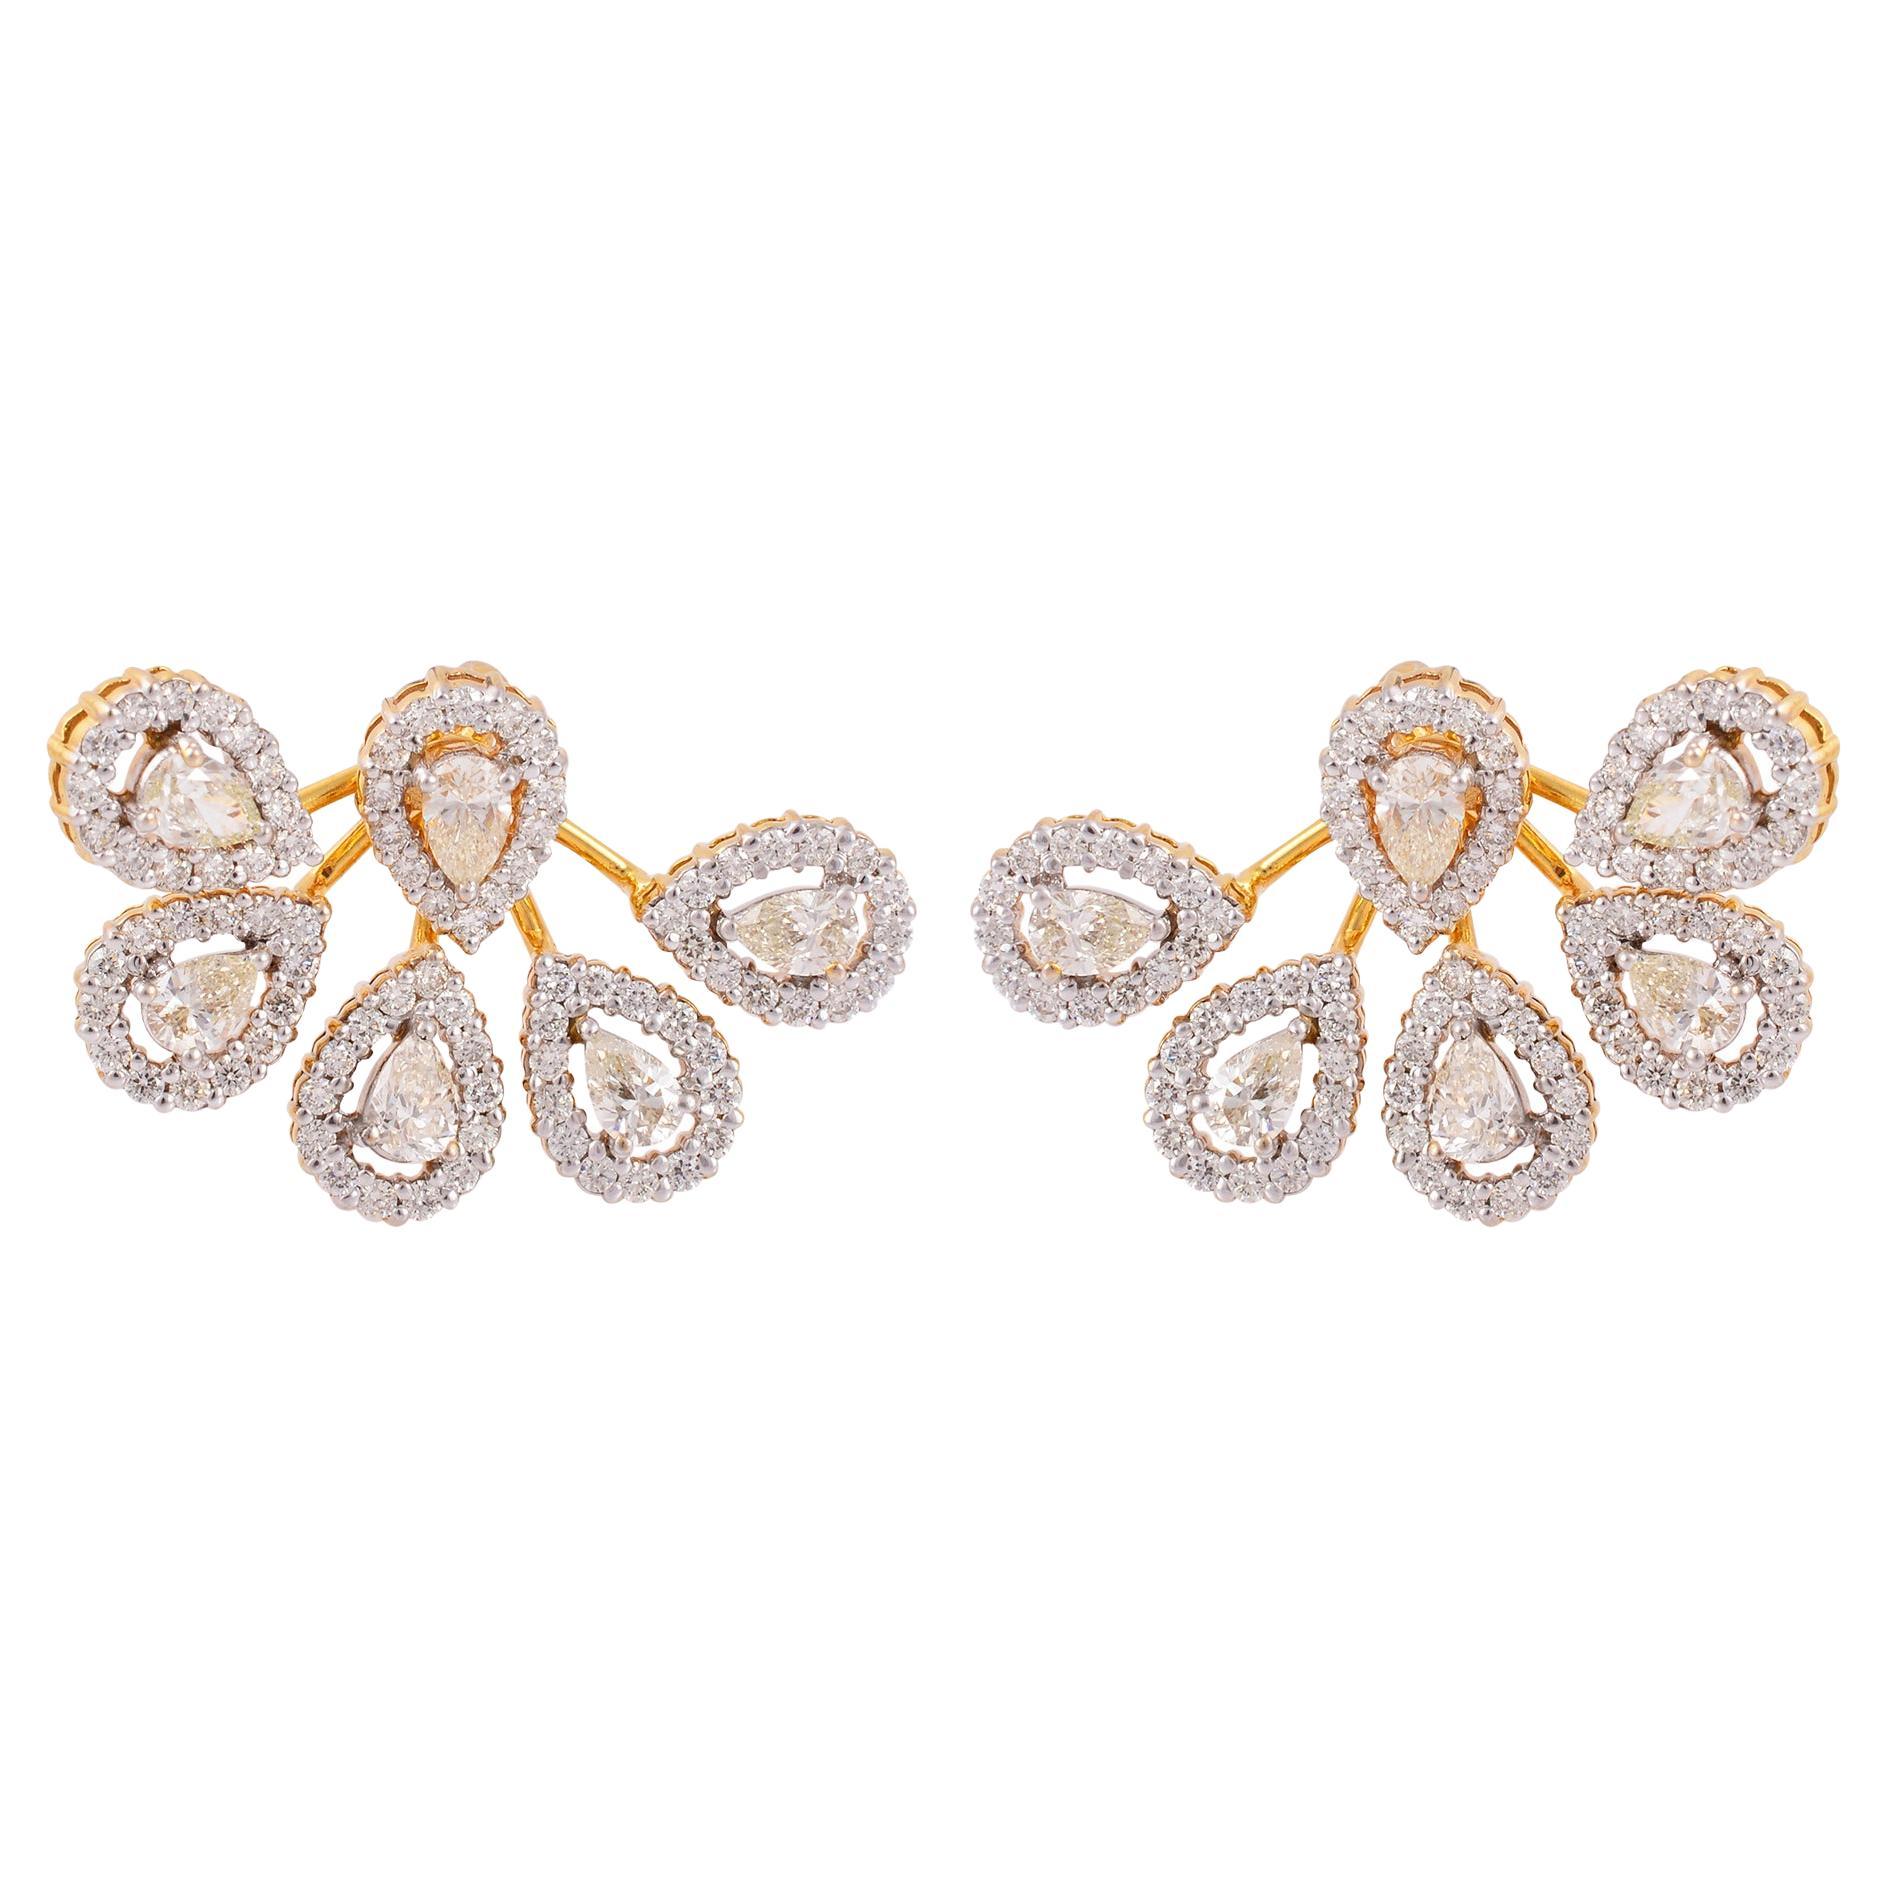 Natural 4.50 Carat Pear & Round Diamond Earrings 18 Karat Yellow Gold Jewelry For Sale